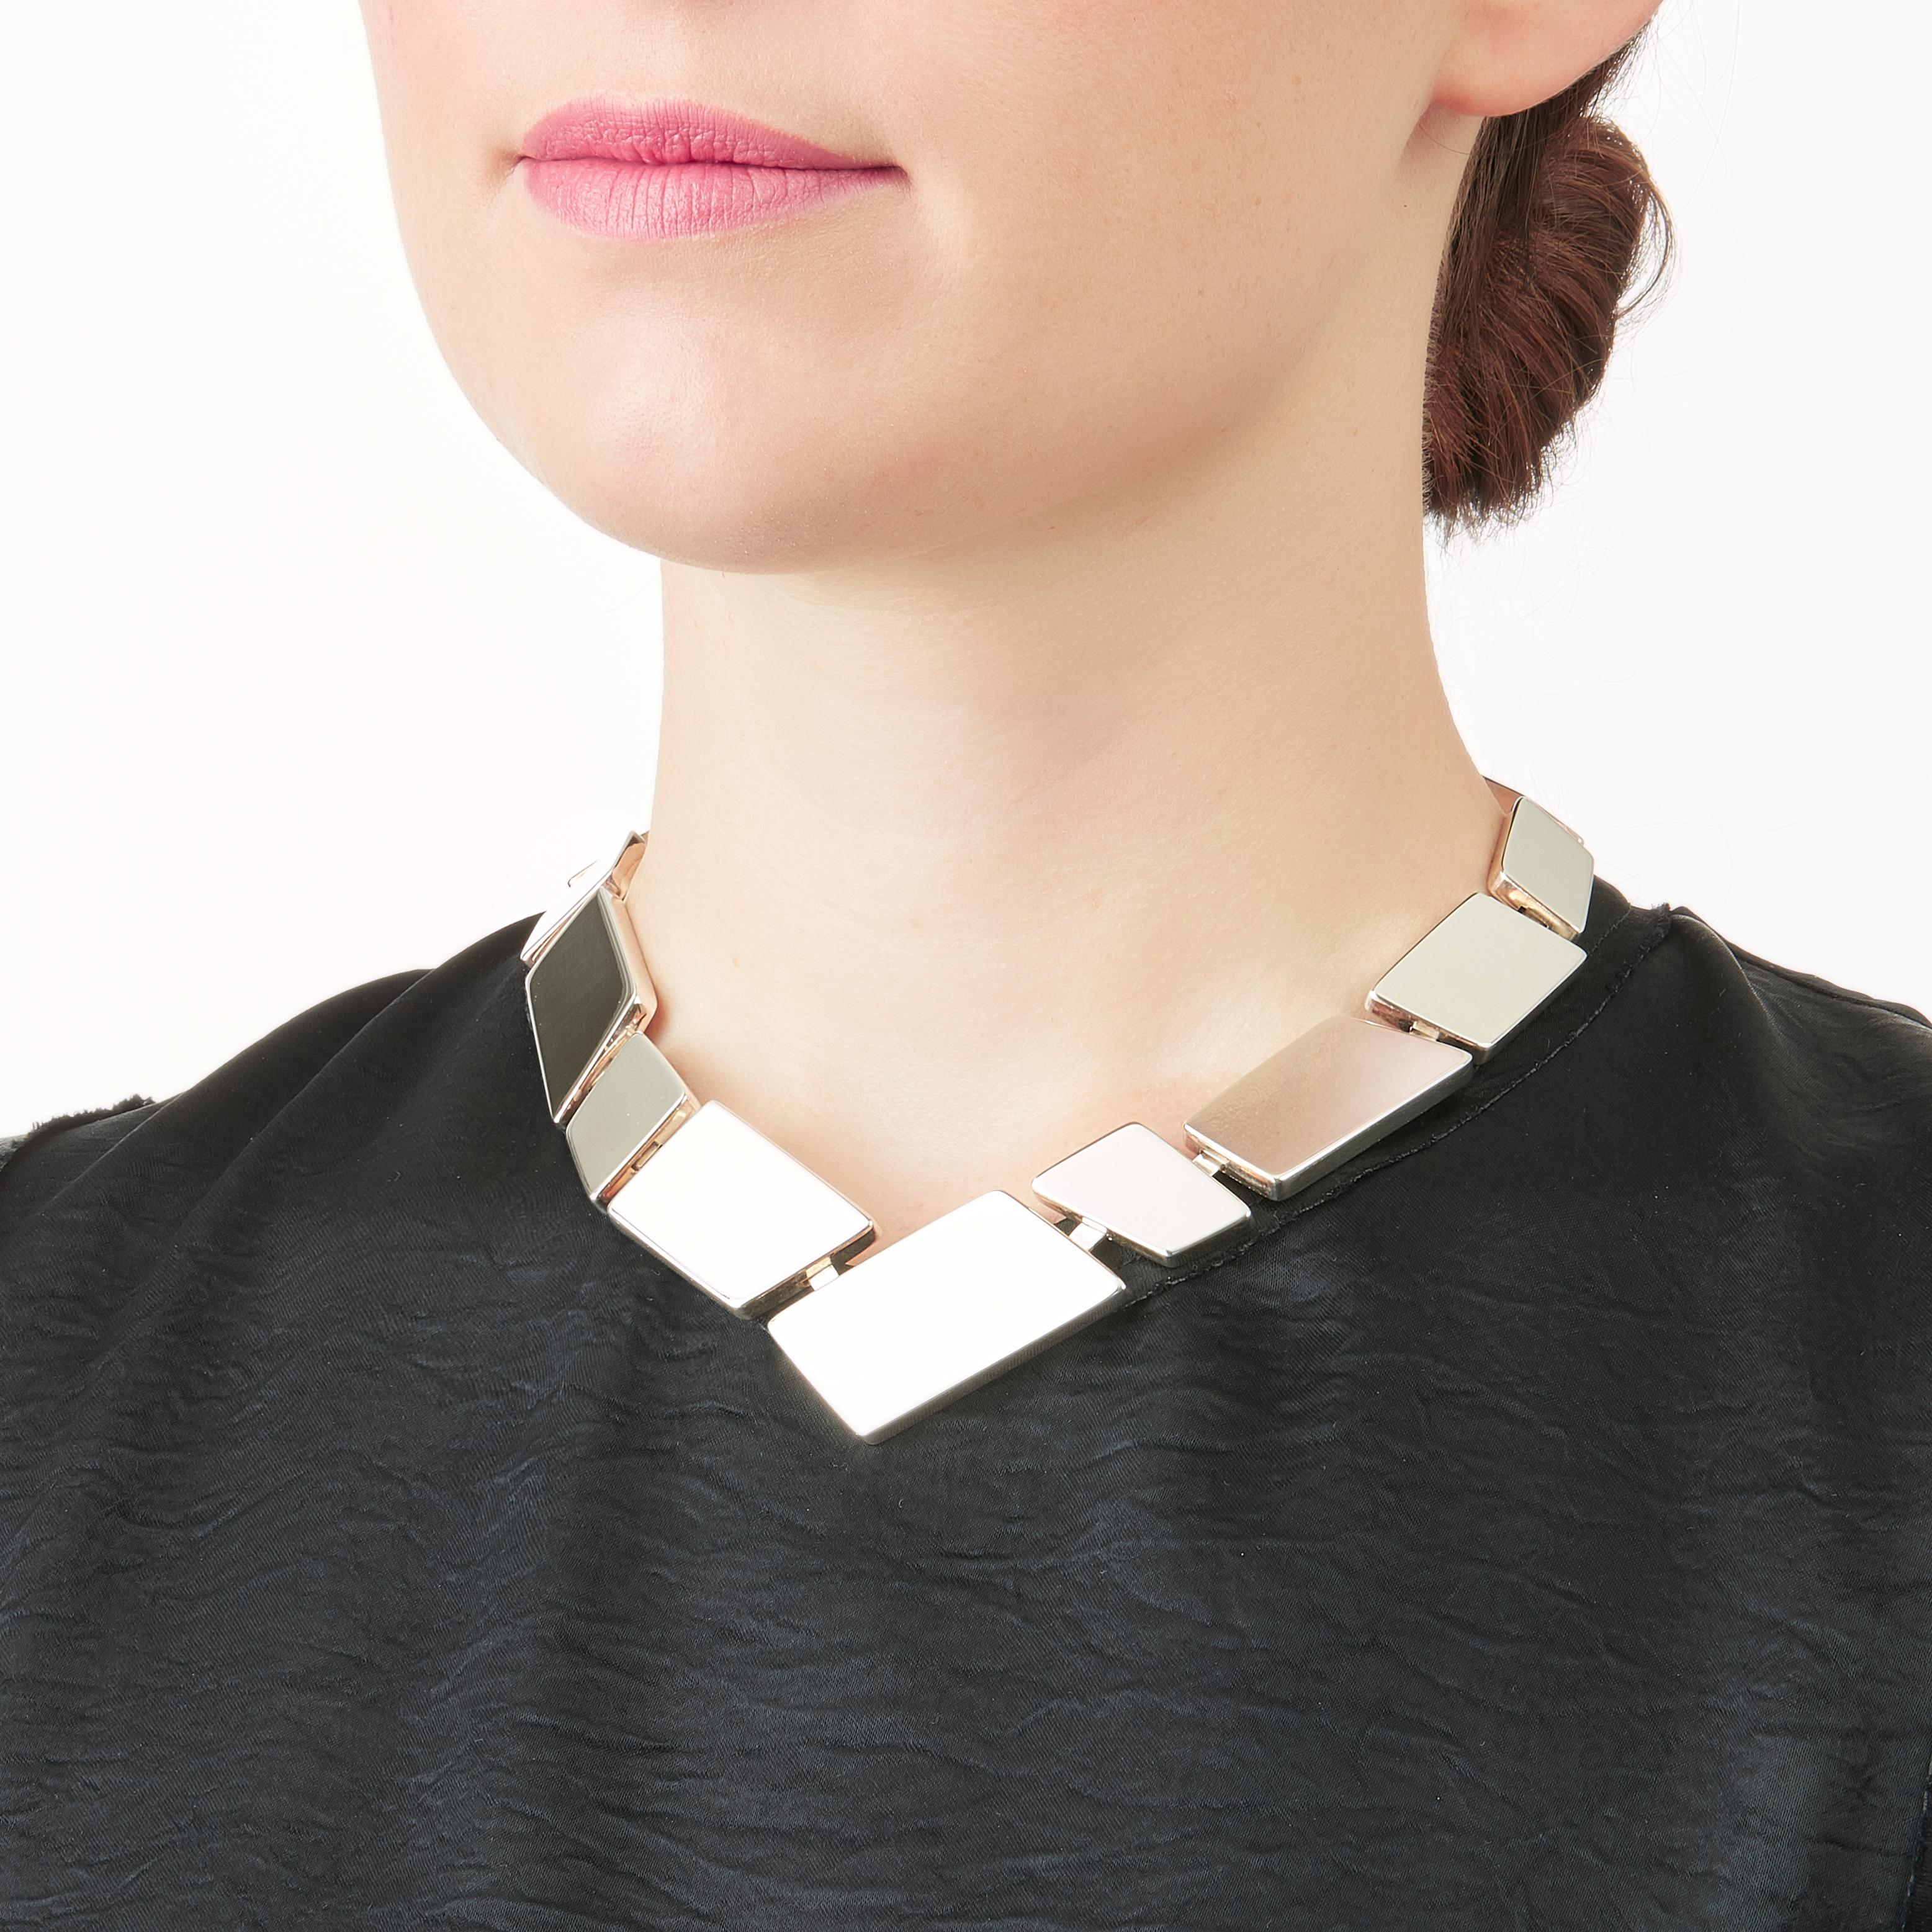 Made by hand in Nathalie Jean's Milan atelier in limited edition, the Saphir Absolu Small Necklace is composed of light hollow geometric volumes with rounded edges, in sterling silver. Clever hidden links allow the pieces to drape nicely around the